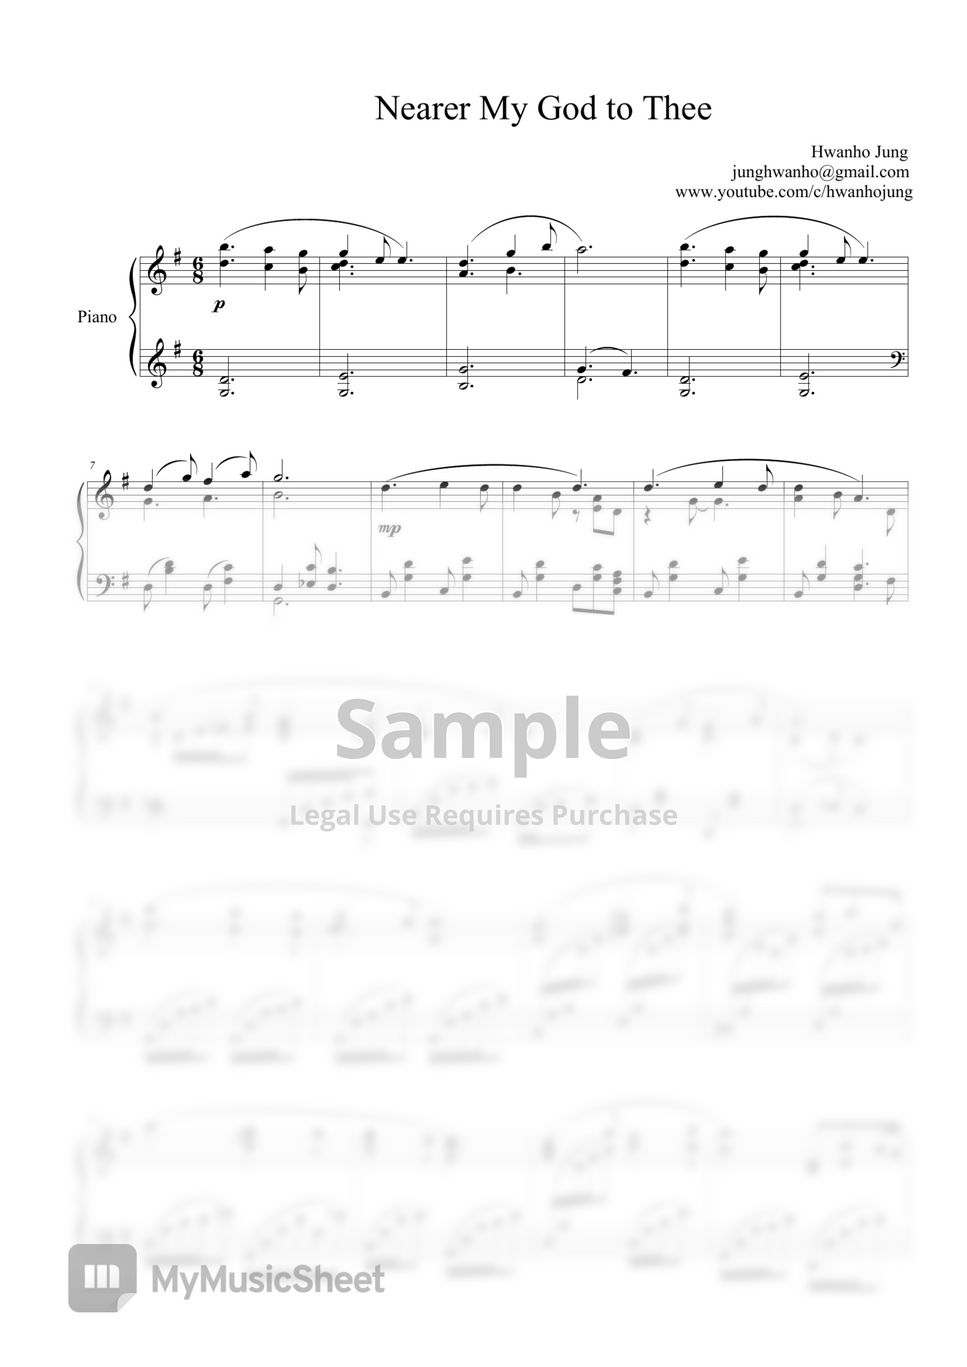 HYMN - Nearer My God to Thee (Piano Arrangement) by Hwan ho Jung